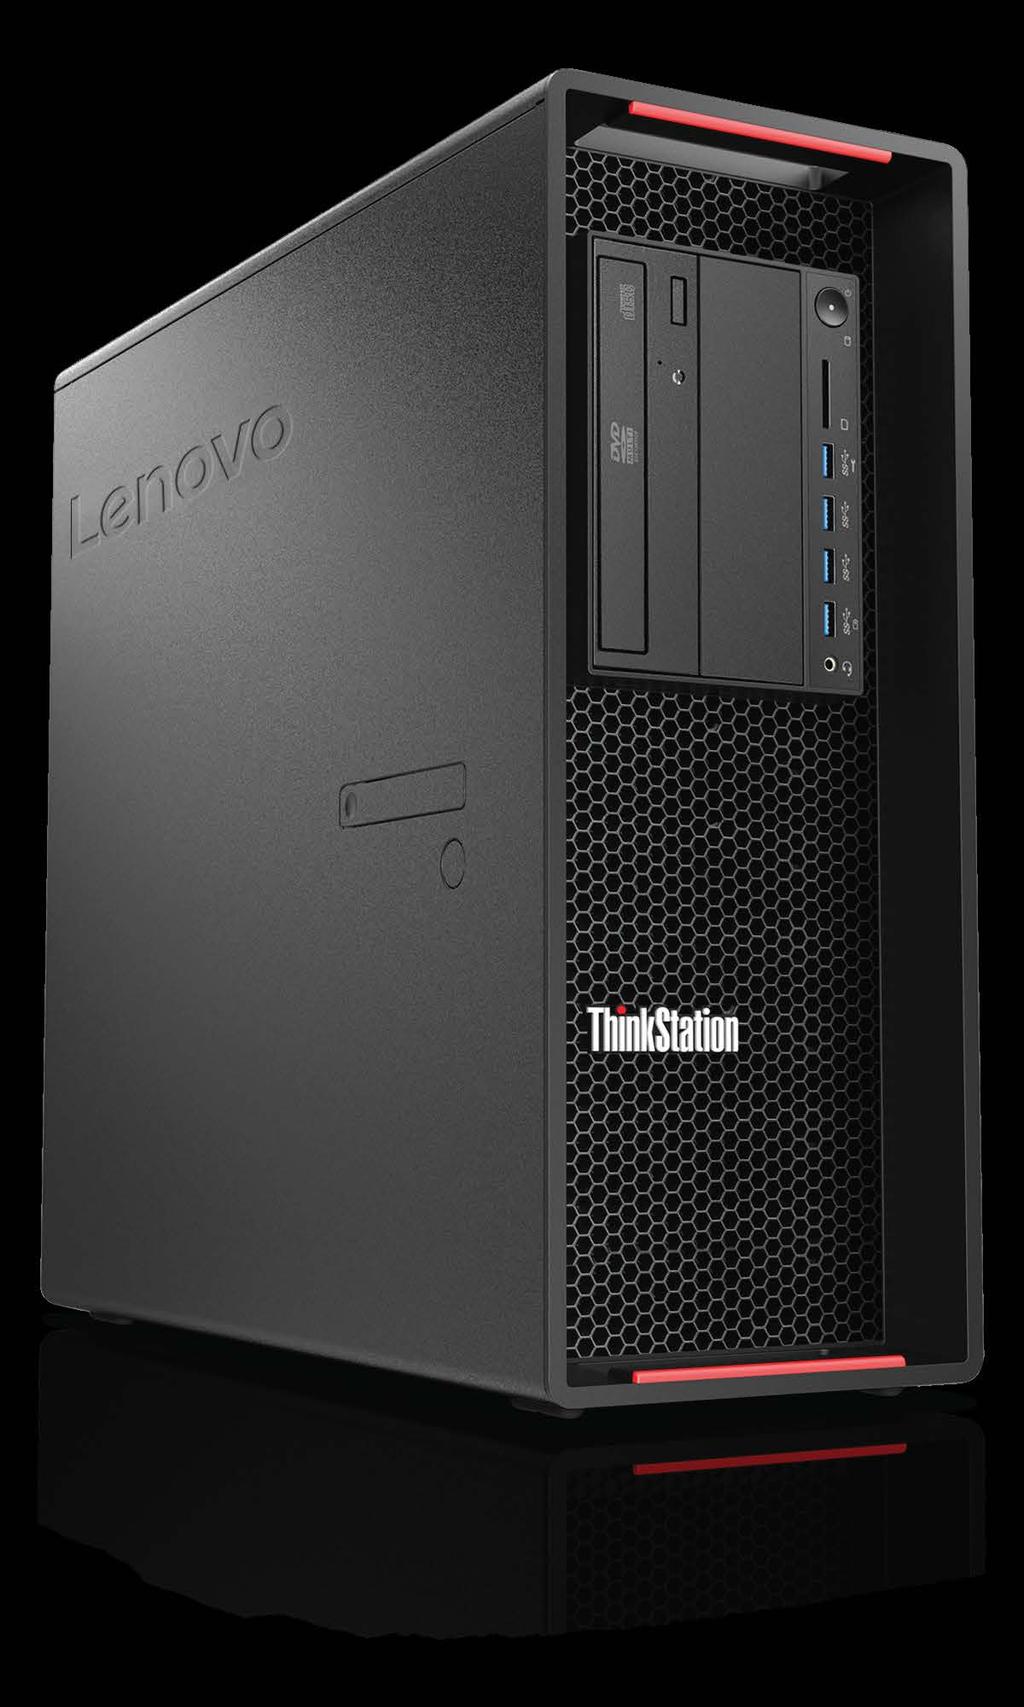 Why Lenovo Lenovo focuses on power, performance and reliability in every machine we design; both ThinkStation and ThinkPad.